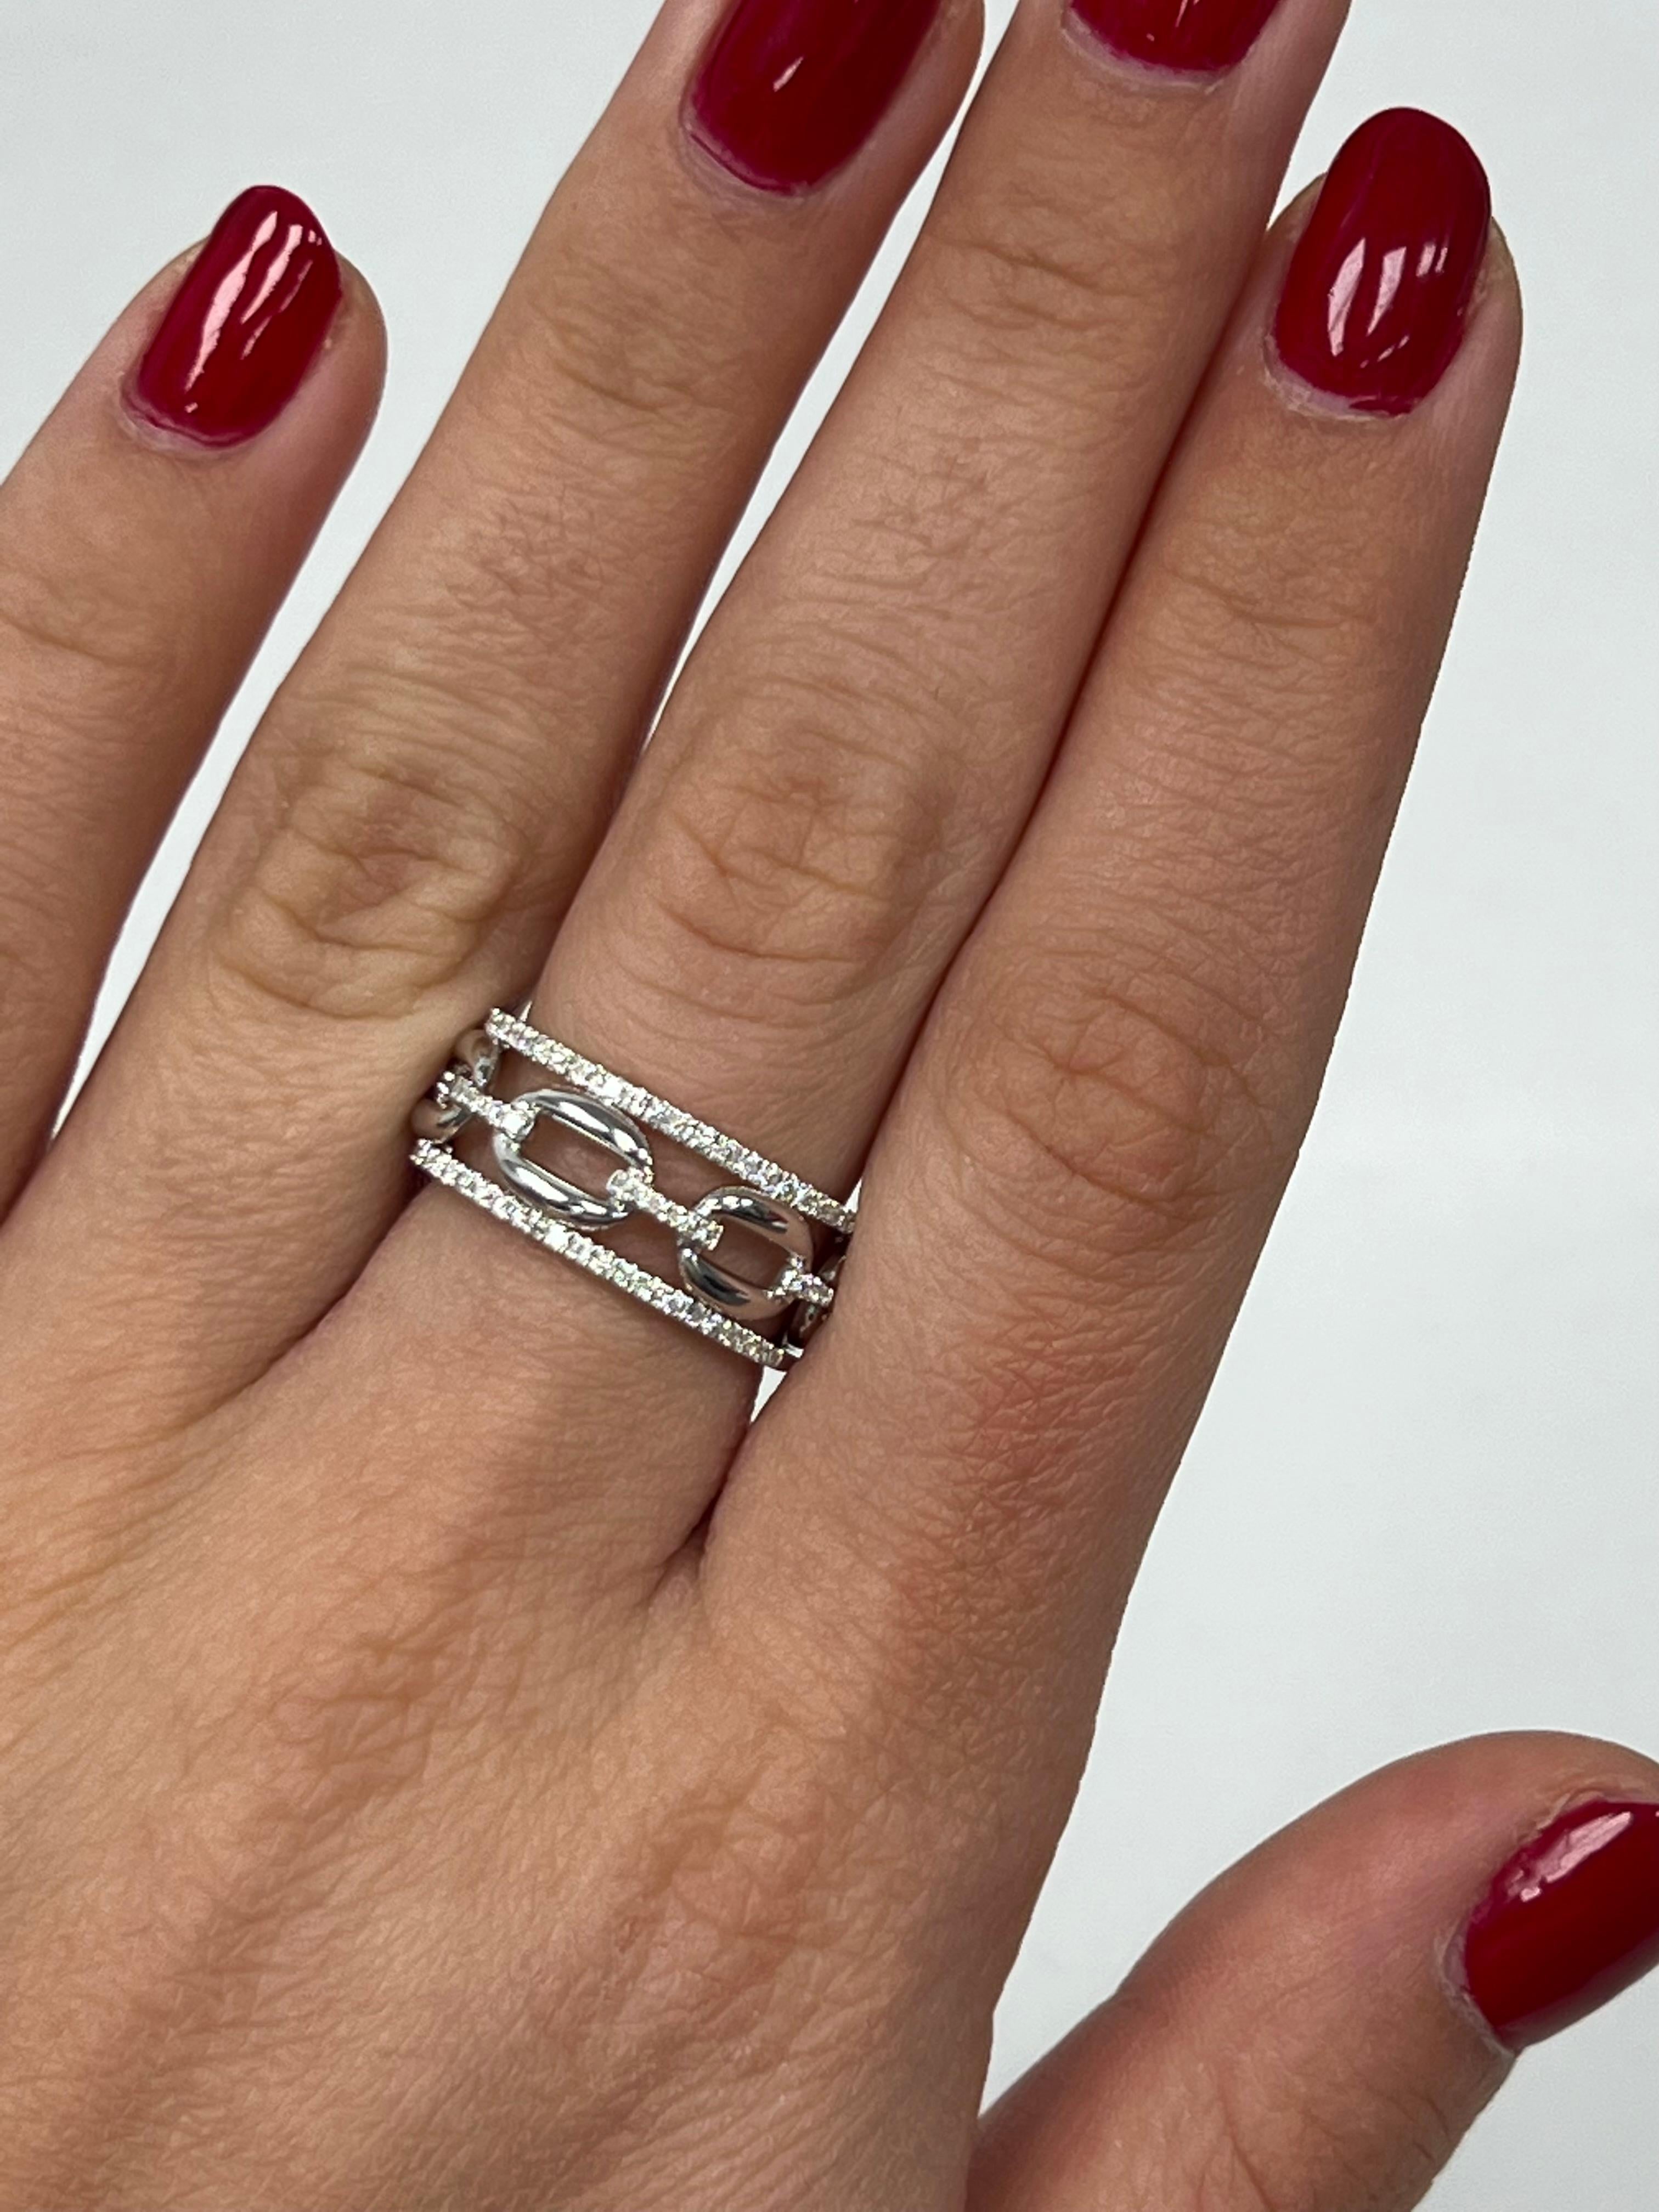 Channel Set Chain Link Diamond Ring In New Condition For Sale In Great Neck, NY